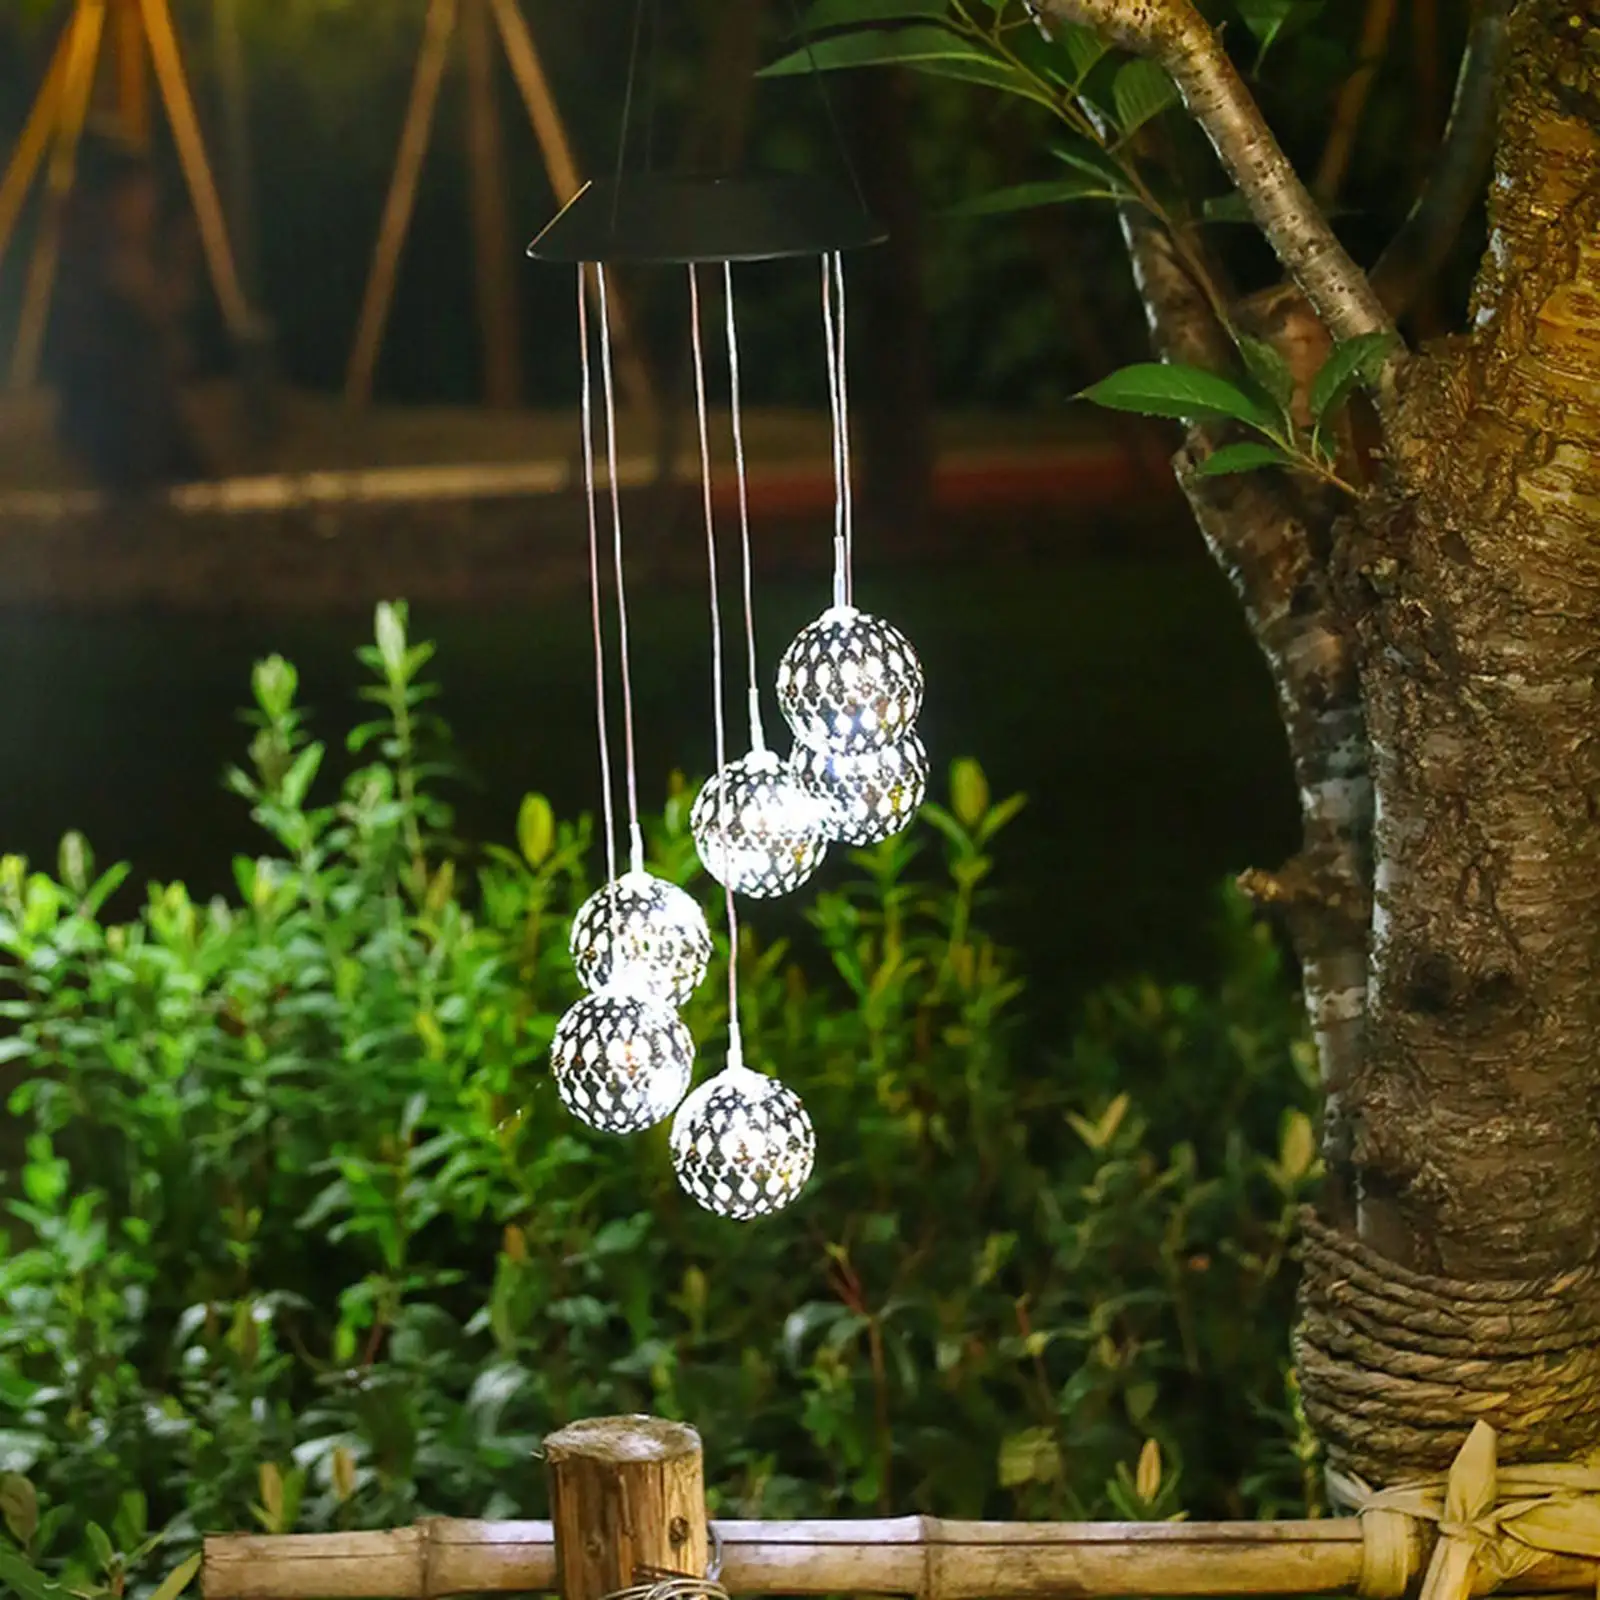 Crystal Ball Wind Chimes Changing Colors LED Solar Lights Decorative Romantic for Festival Decoration